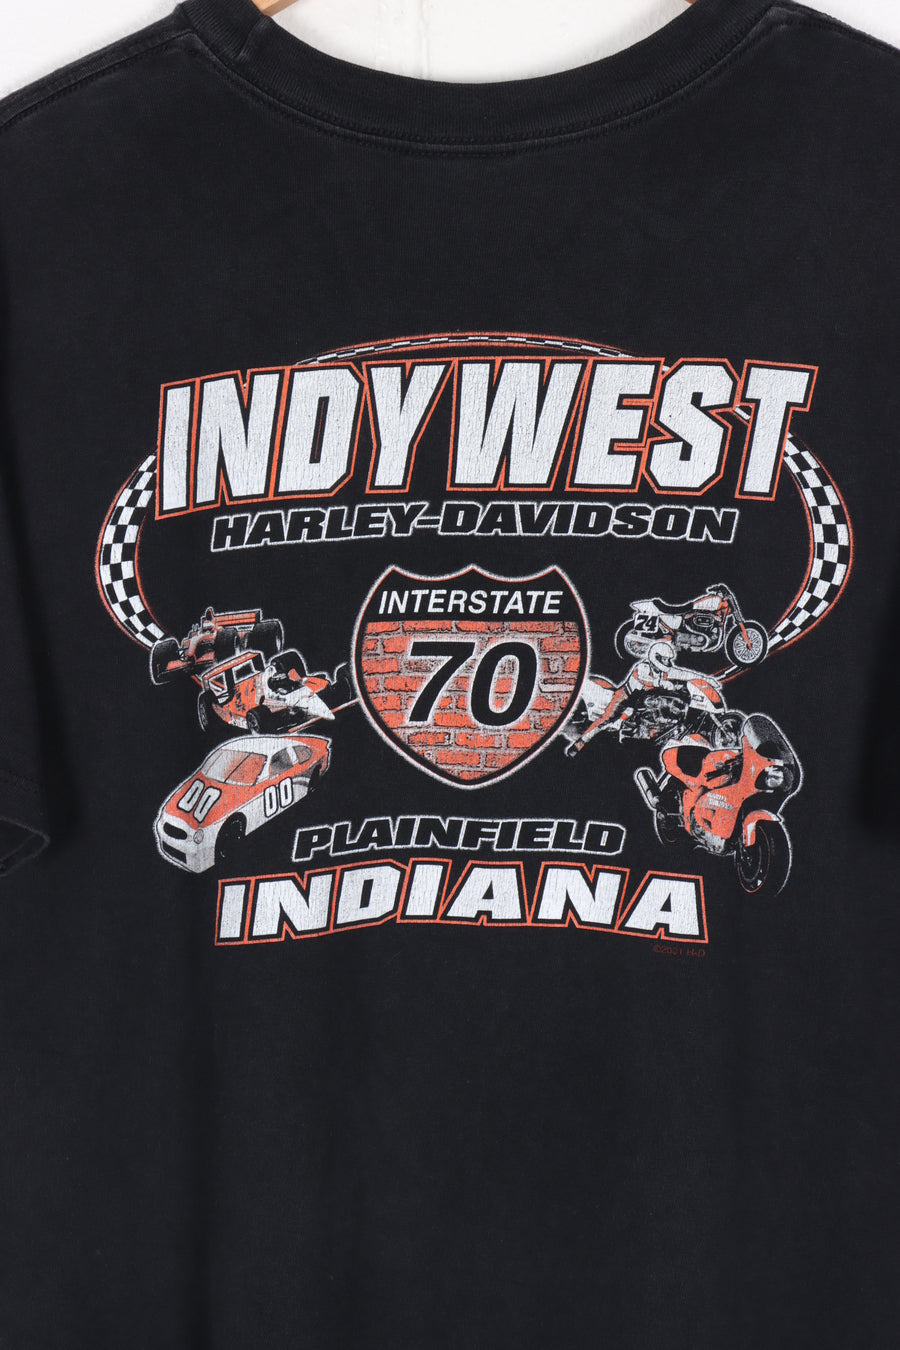 HARLEY DAVIDSON Eagle Flame Wings Indy West Tee (M-L)